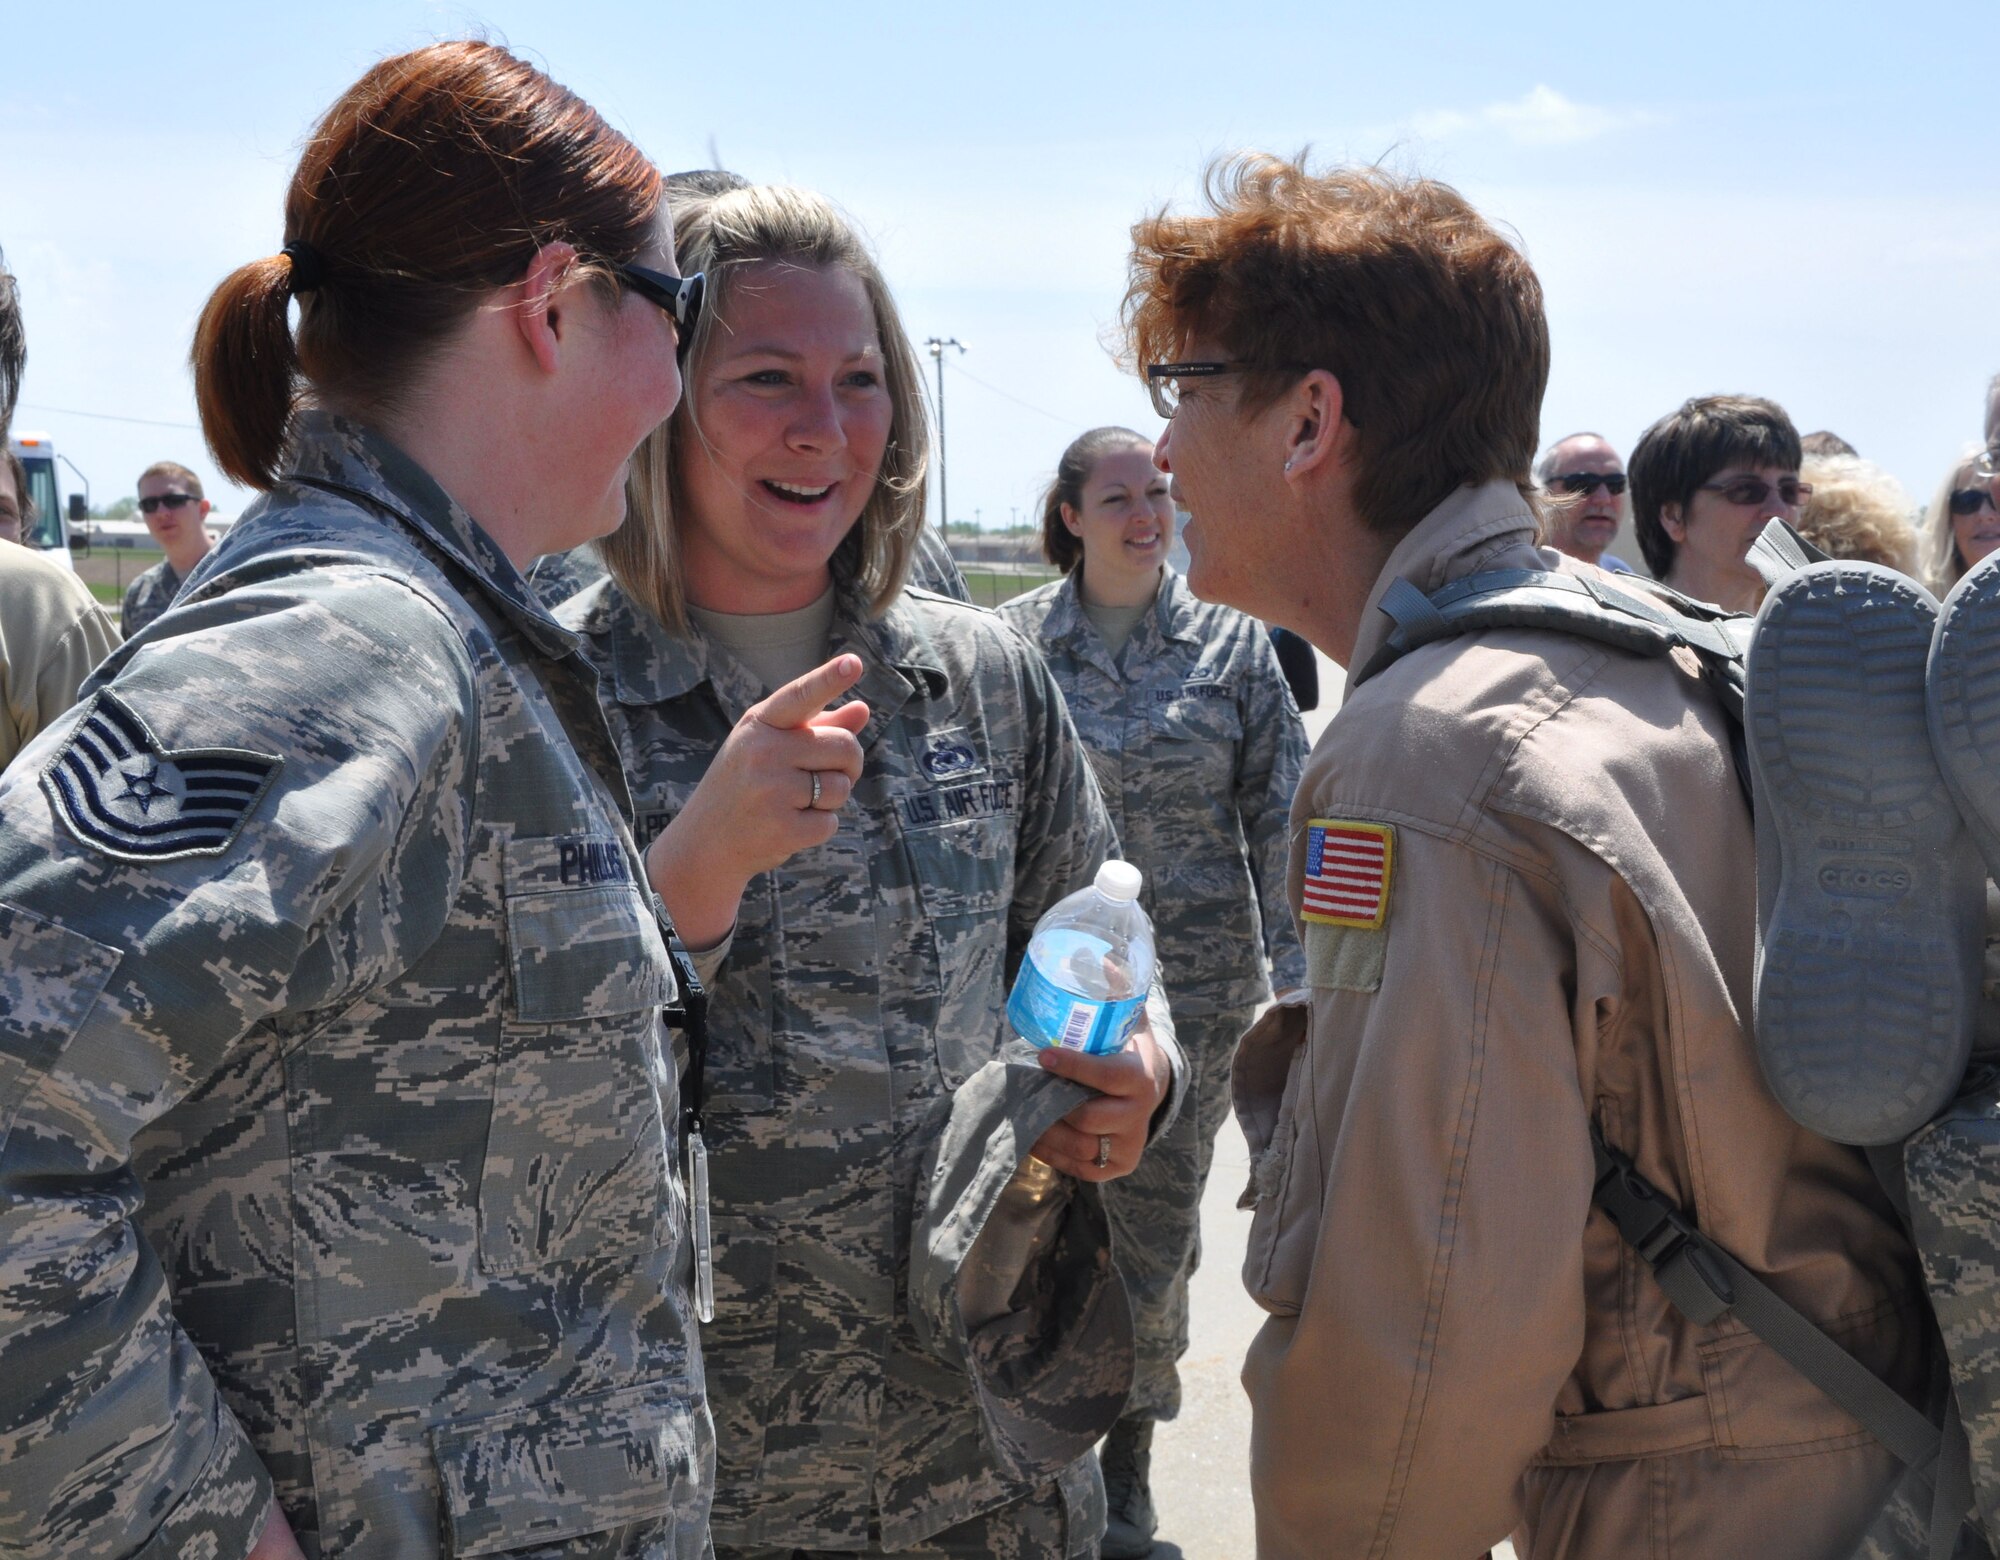 (Left to right)  Tech. Sgts. Anne Phillips, 931st Maintenance Squadron jet mechanic, and Carrie Van Praag, 931st Air Refueling Group supply NCOIC, greet Chief Master Sgt. Kathy Lowman, 18th Air Refueling Squadron boom operator April 16, 2015, at McConnell Air Force Base, Kan.  Lowman had just returned from a deployment to Southwest Asia, where she conducted refueling missions in support of the 379th Air Expeditionary Squadron. (U.S. Air Force photo by Tech. Sgt. Abigail Klein)